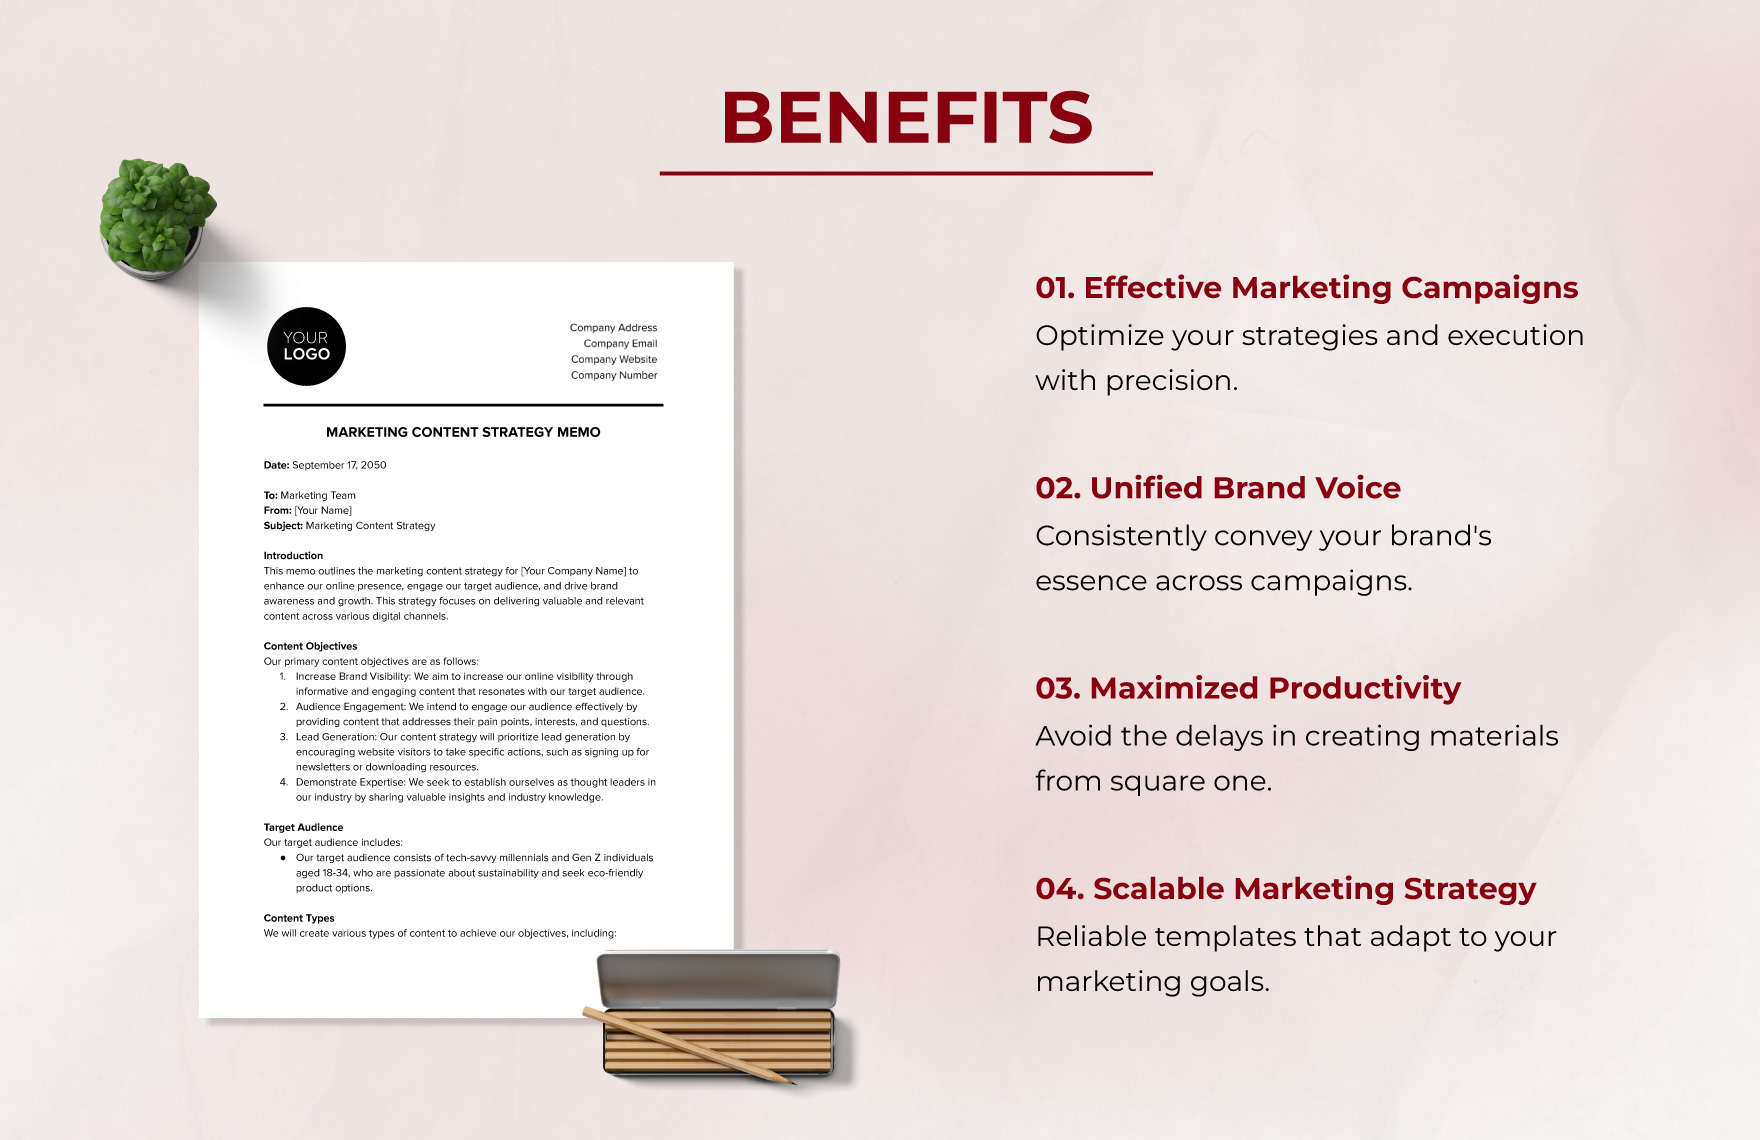 Marketing Content Strategy Memo Template